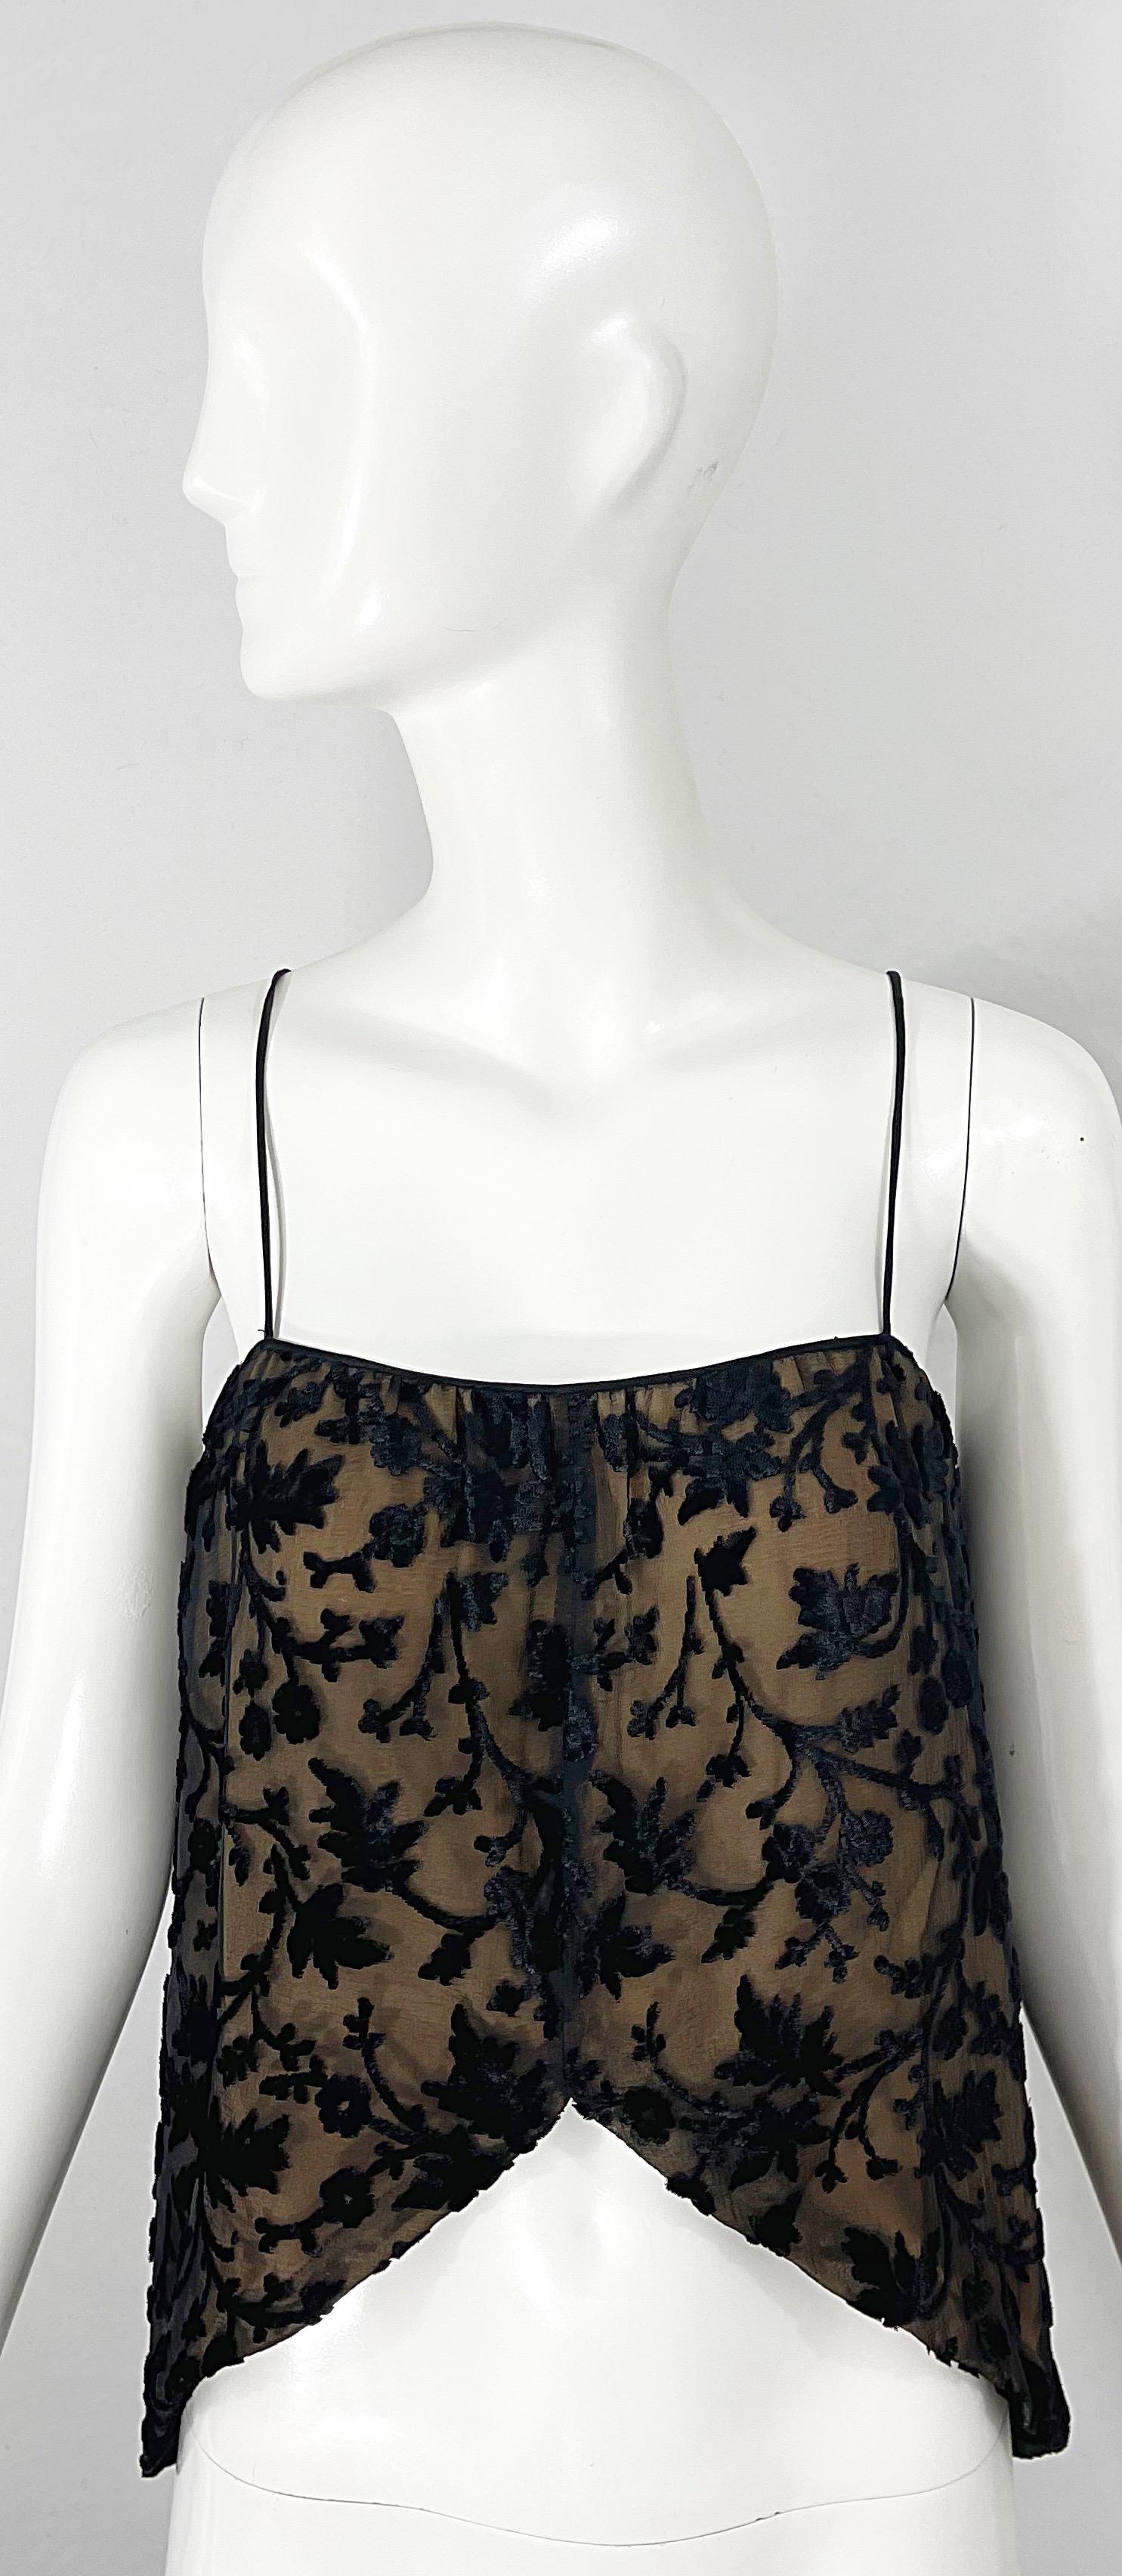 Chic 1970s HOLLY’S HARP black and nude silk chiffon and cut velvet sleeveless crop top ! Features a nude chiffon base with sheer black silk chiffon over. Simply slips over the head. Can easily be dressed up or down. Pair with jeans, shorts or a